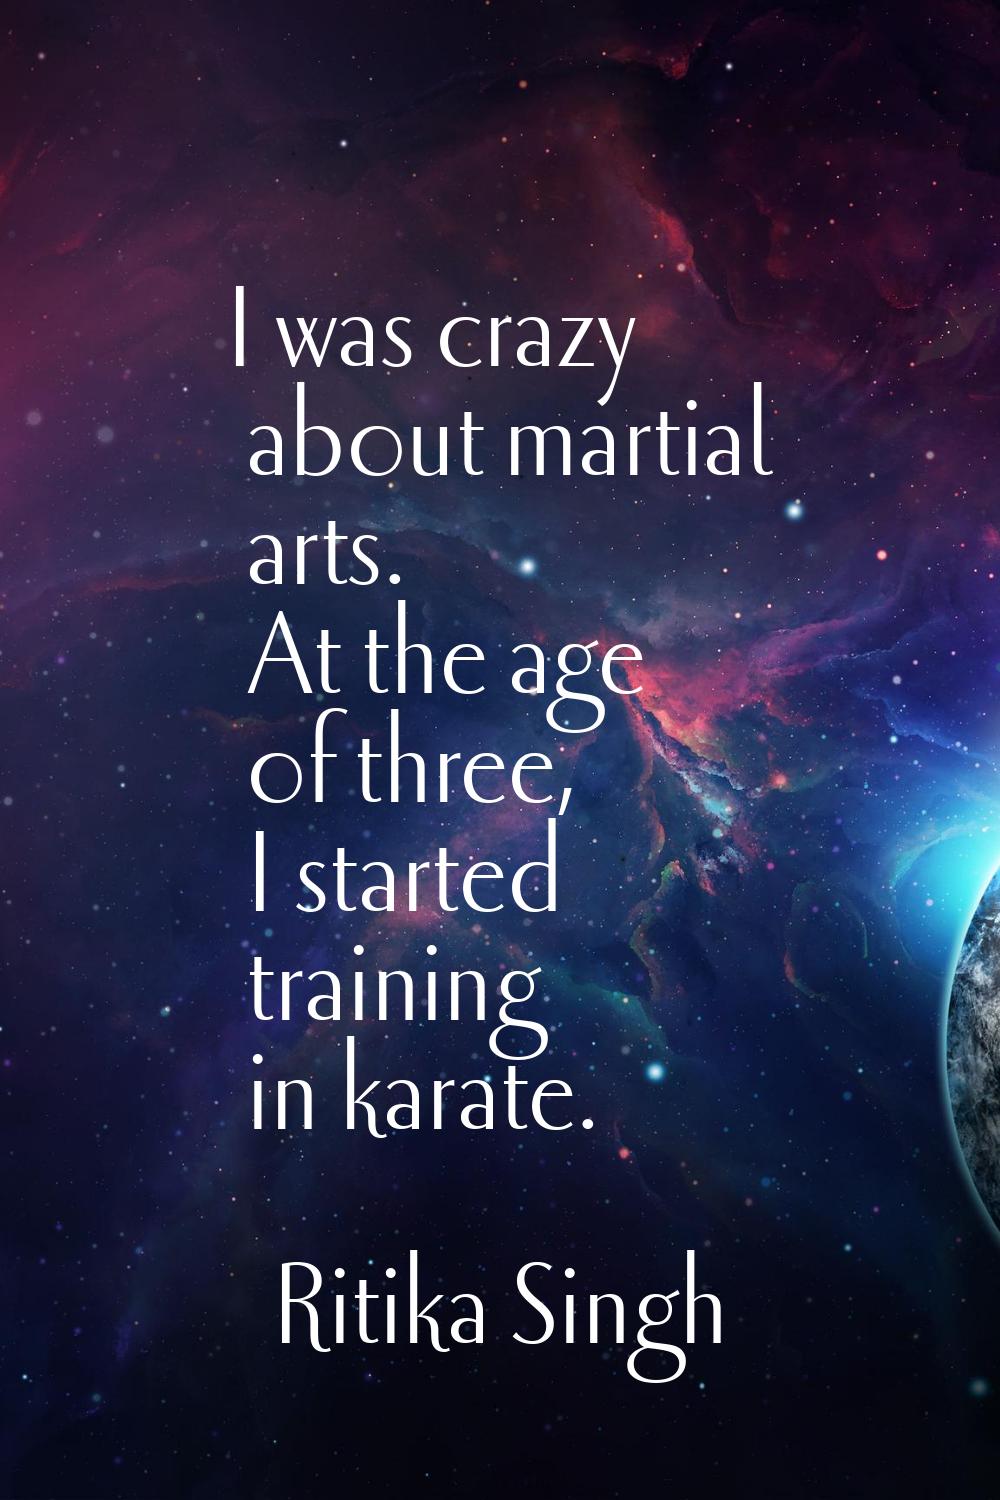 I was crazy about martial arts. At the age of three, I started training in karate.